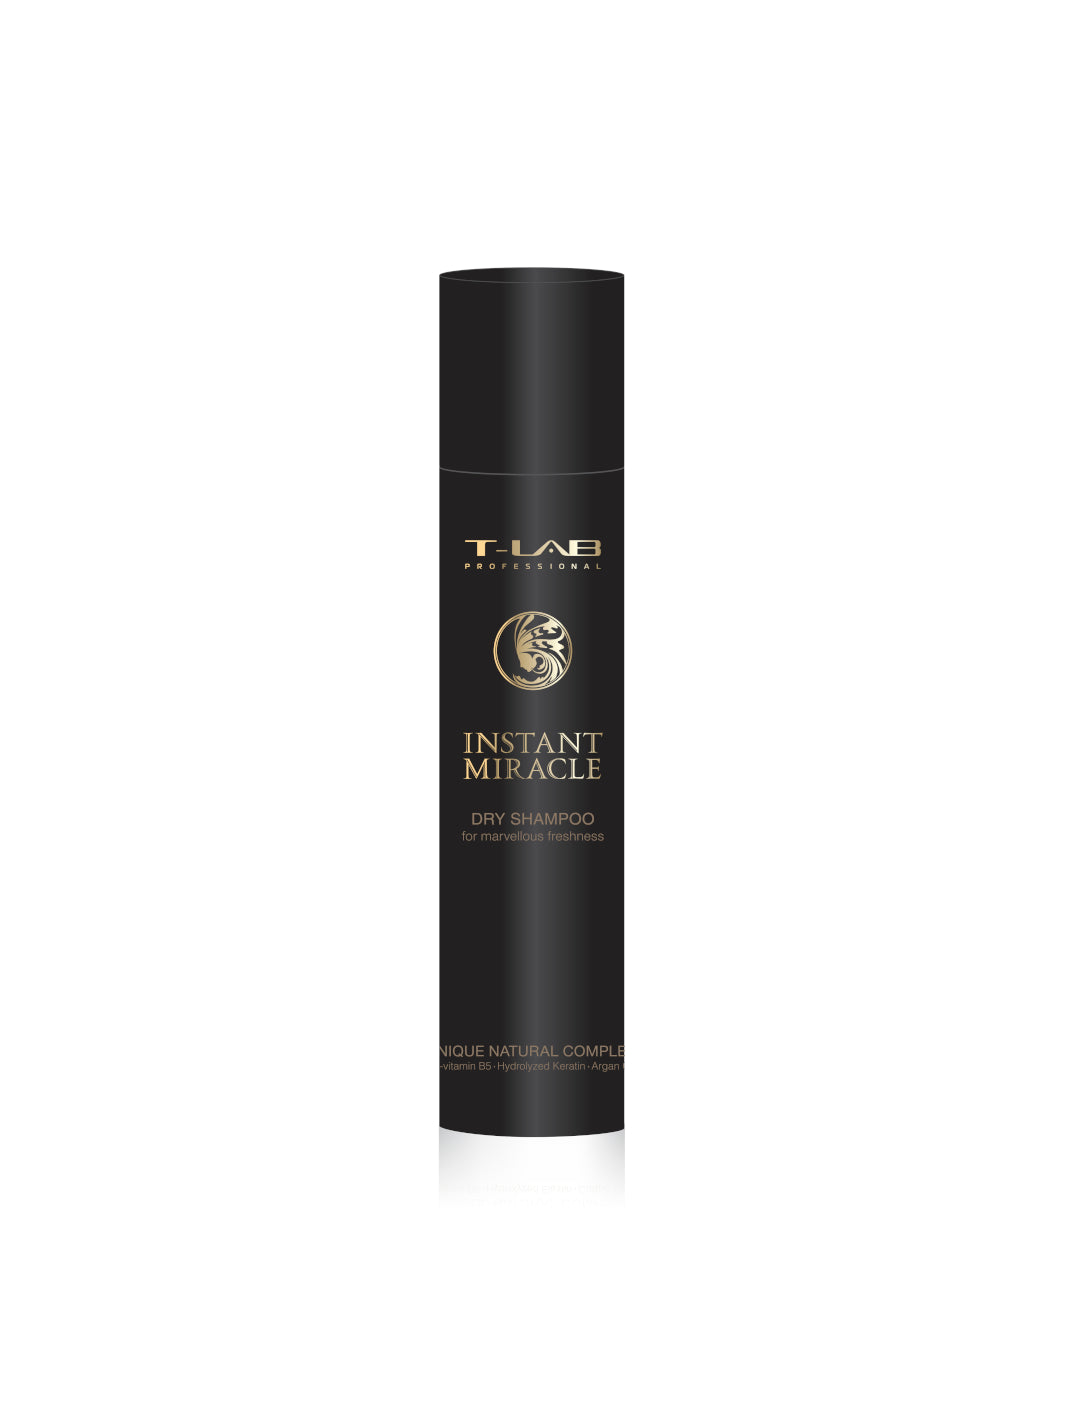 T-LAB PROFESSIONAL INSTANT MIRACLE Dry Shampoo 150 ml